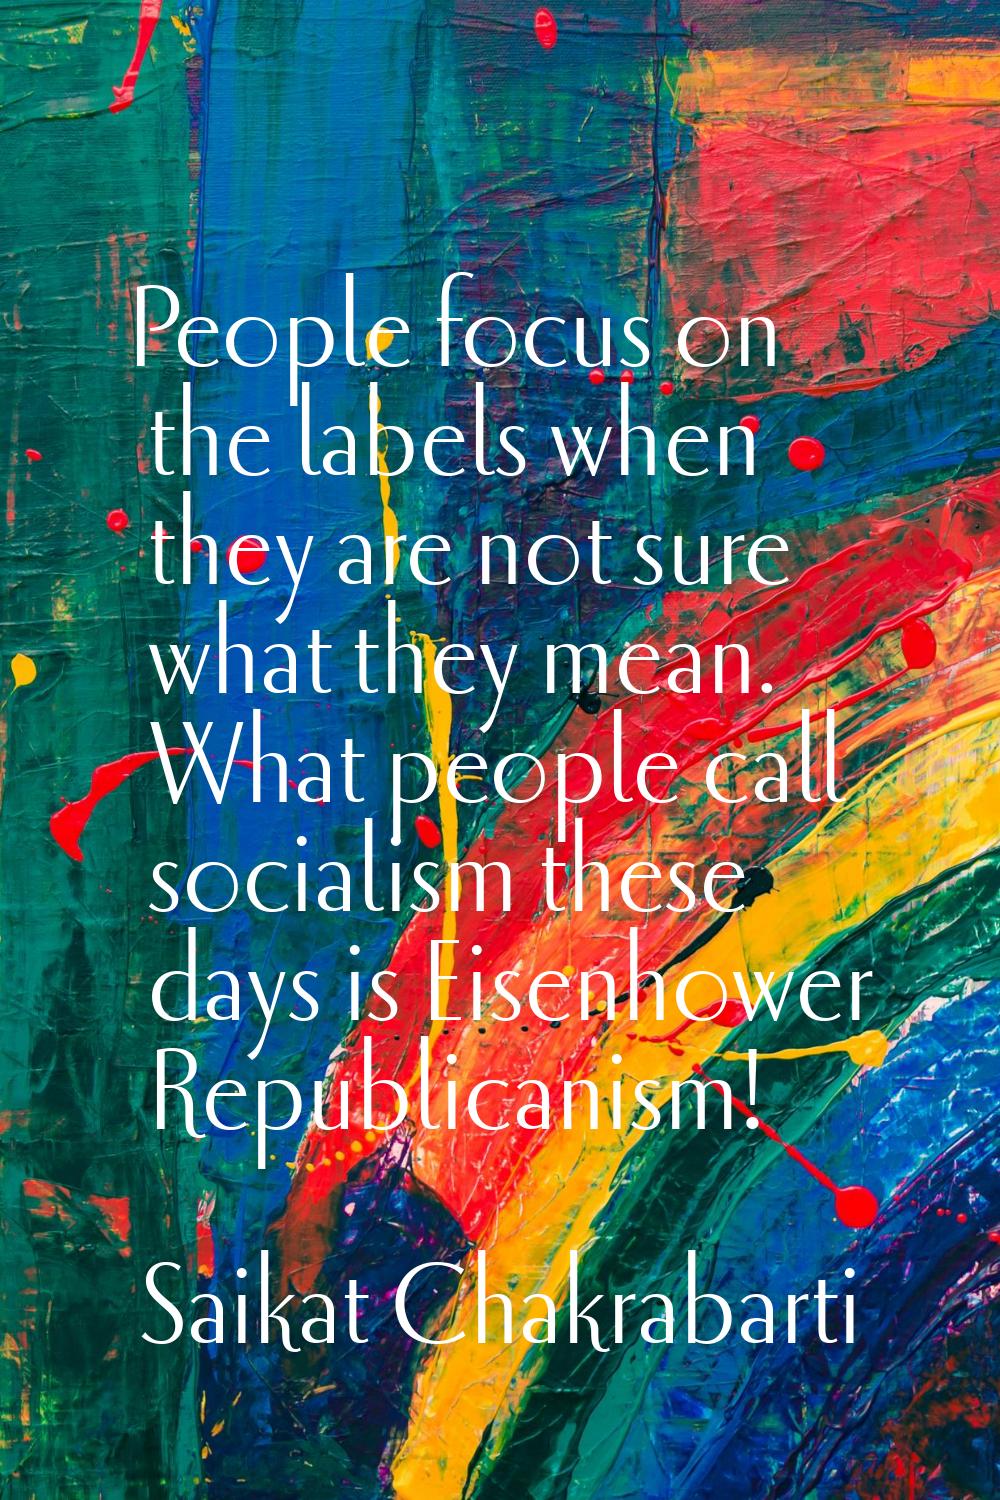 People focus on the labels when they are not sure what they mean. What people call socialism these 